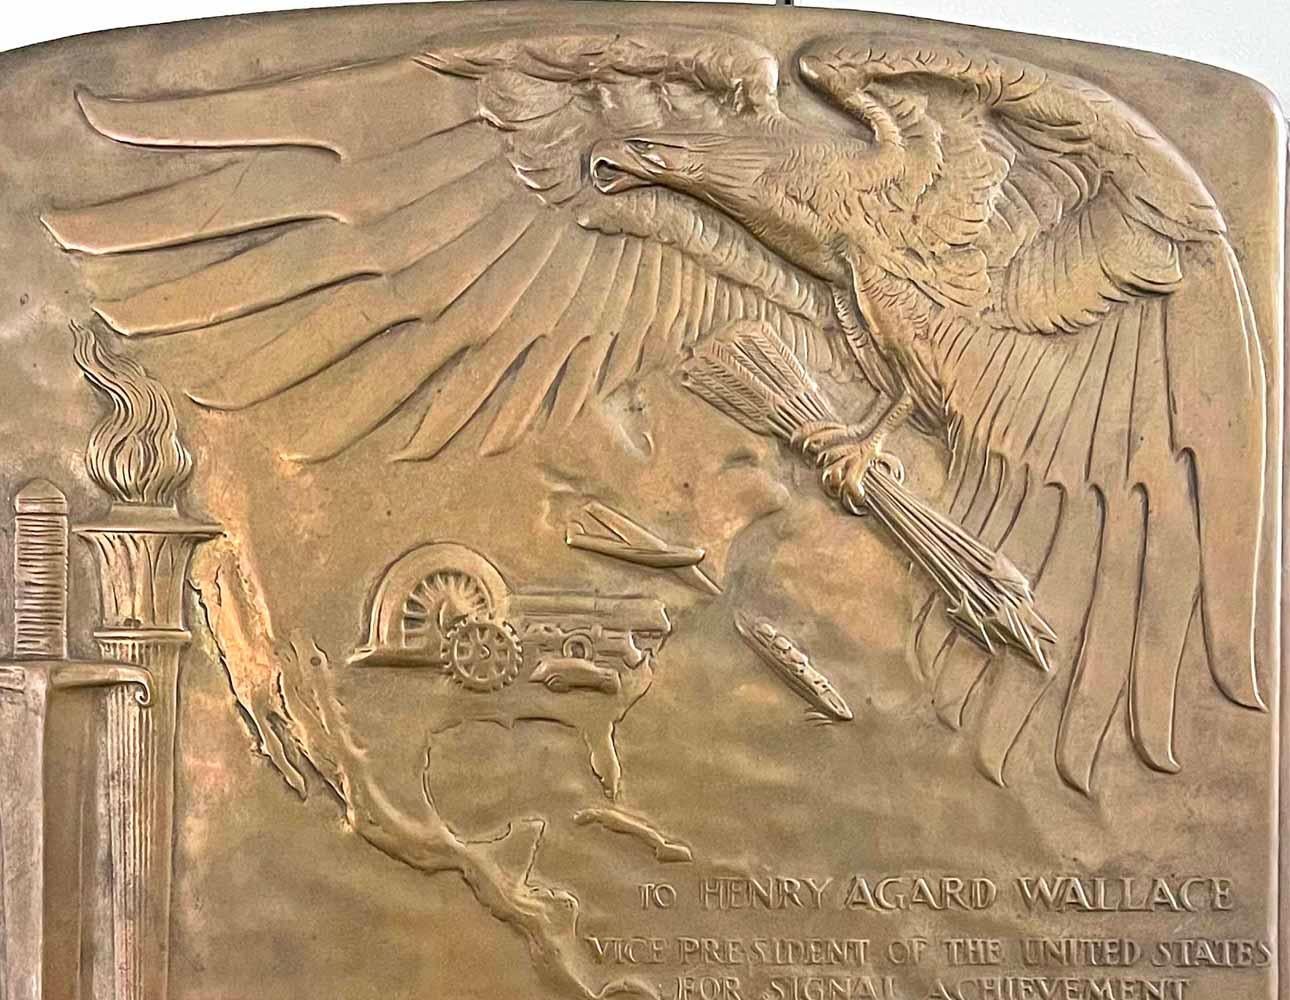 Highly important both artistically and historically, this high style Art Deco bronze panel, full of symbolism and patriotic fervor, was commissioned by B'nai B'rith and sculpted by René Paul Chambellan to honor Vice President Henry Agard Wallace on